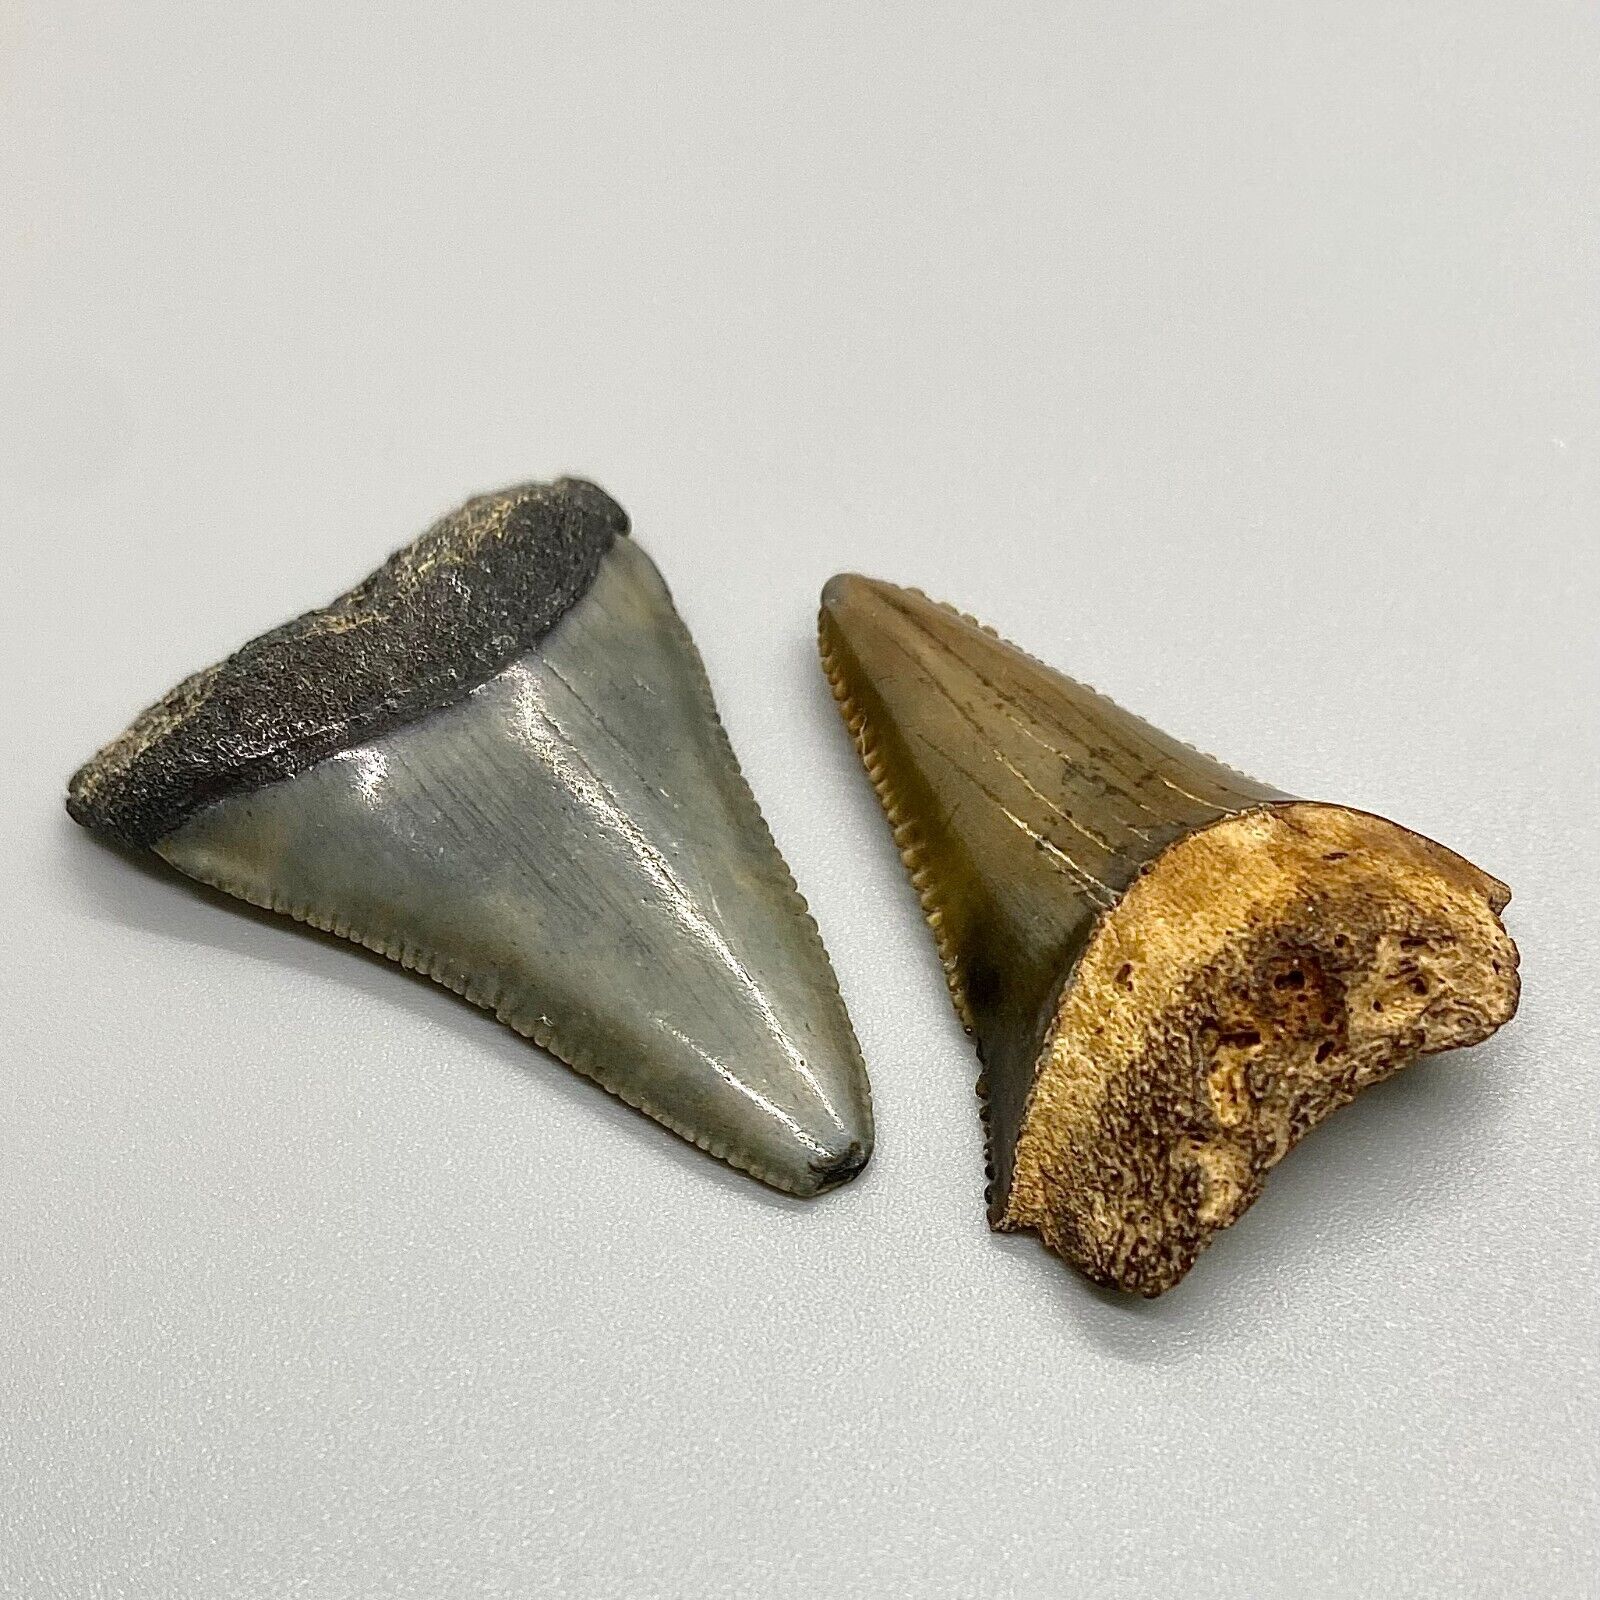 Pair of colorful, serrated Fossil GREAT WHITE Shark Teeth - St. John's- FL